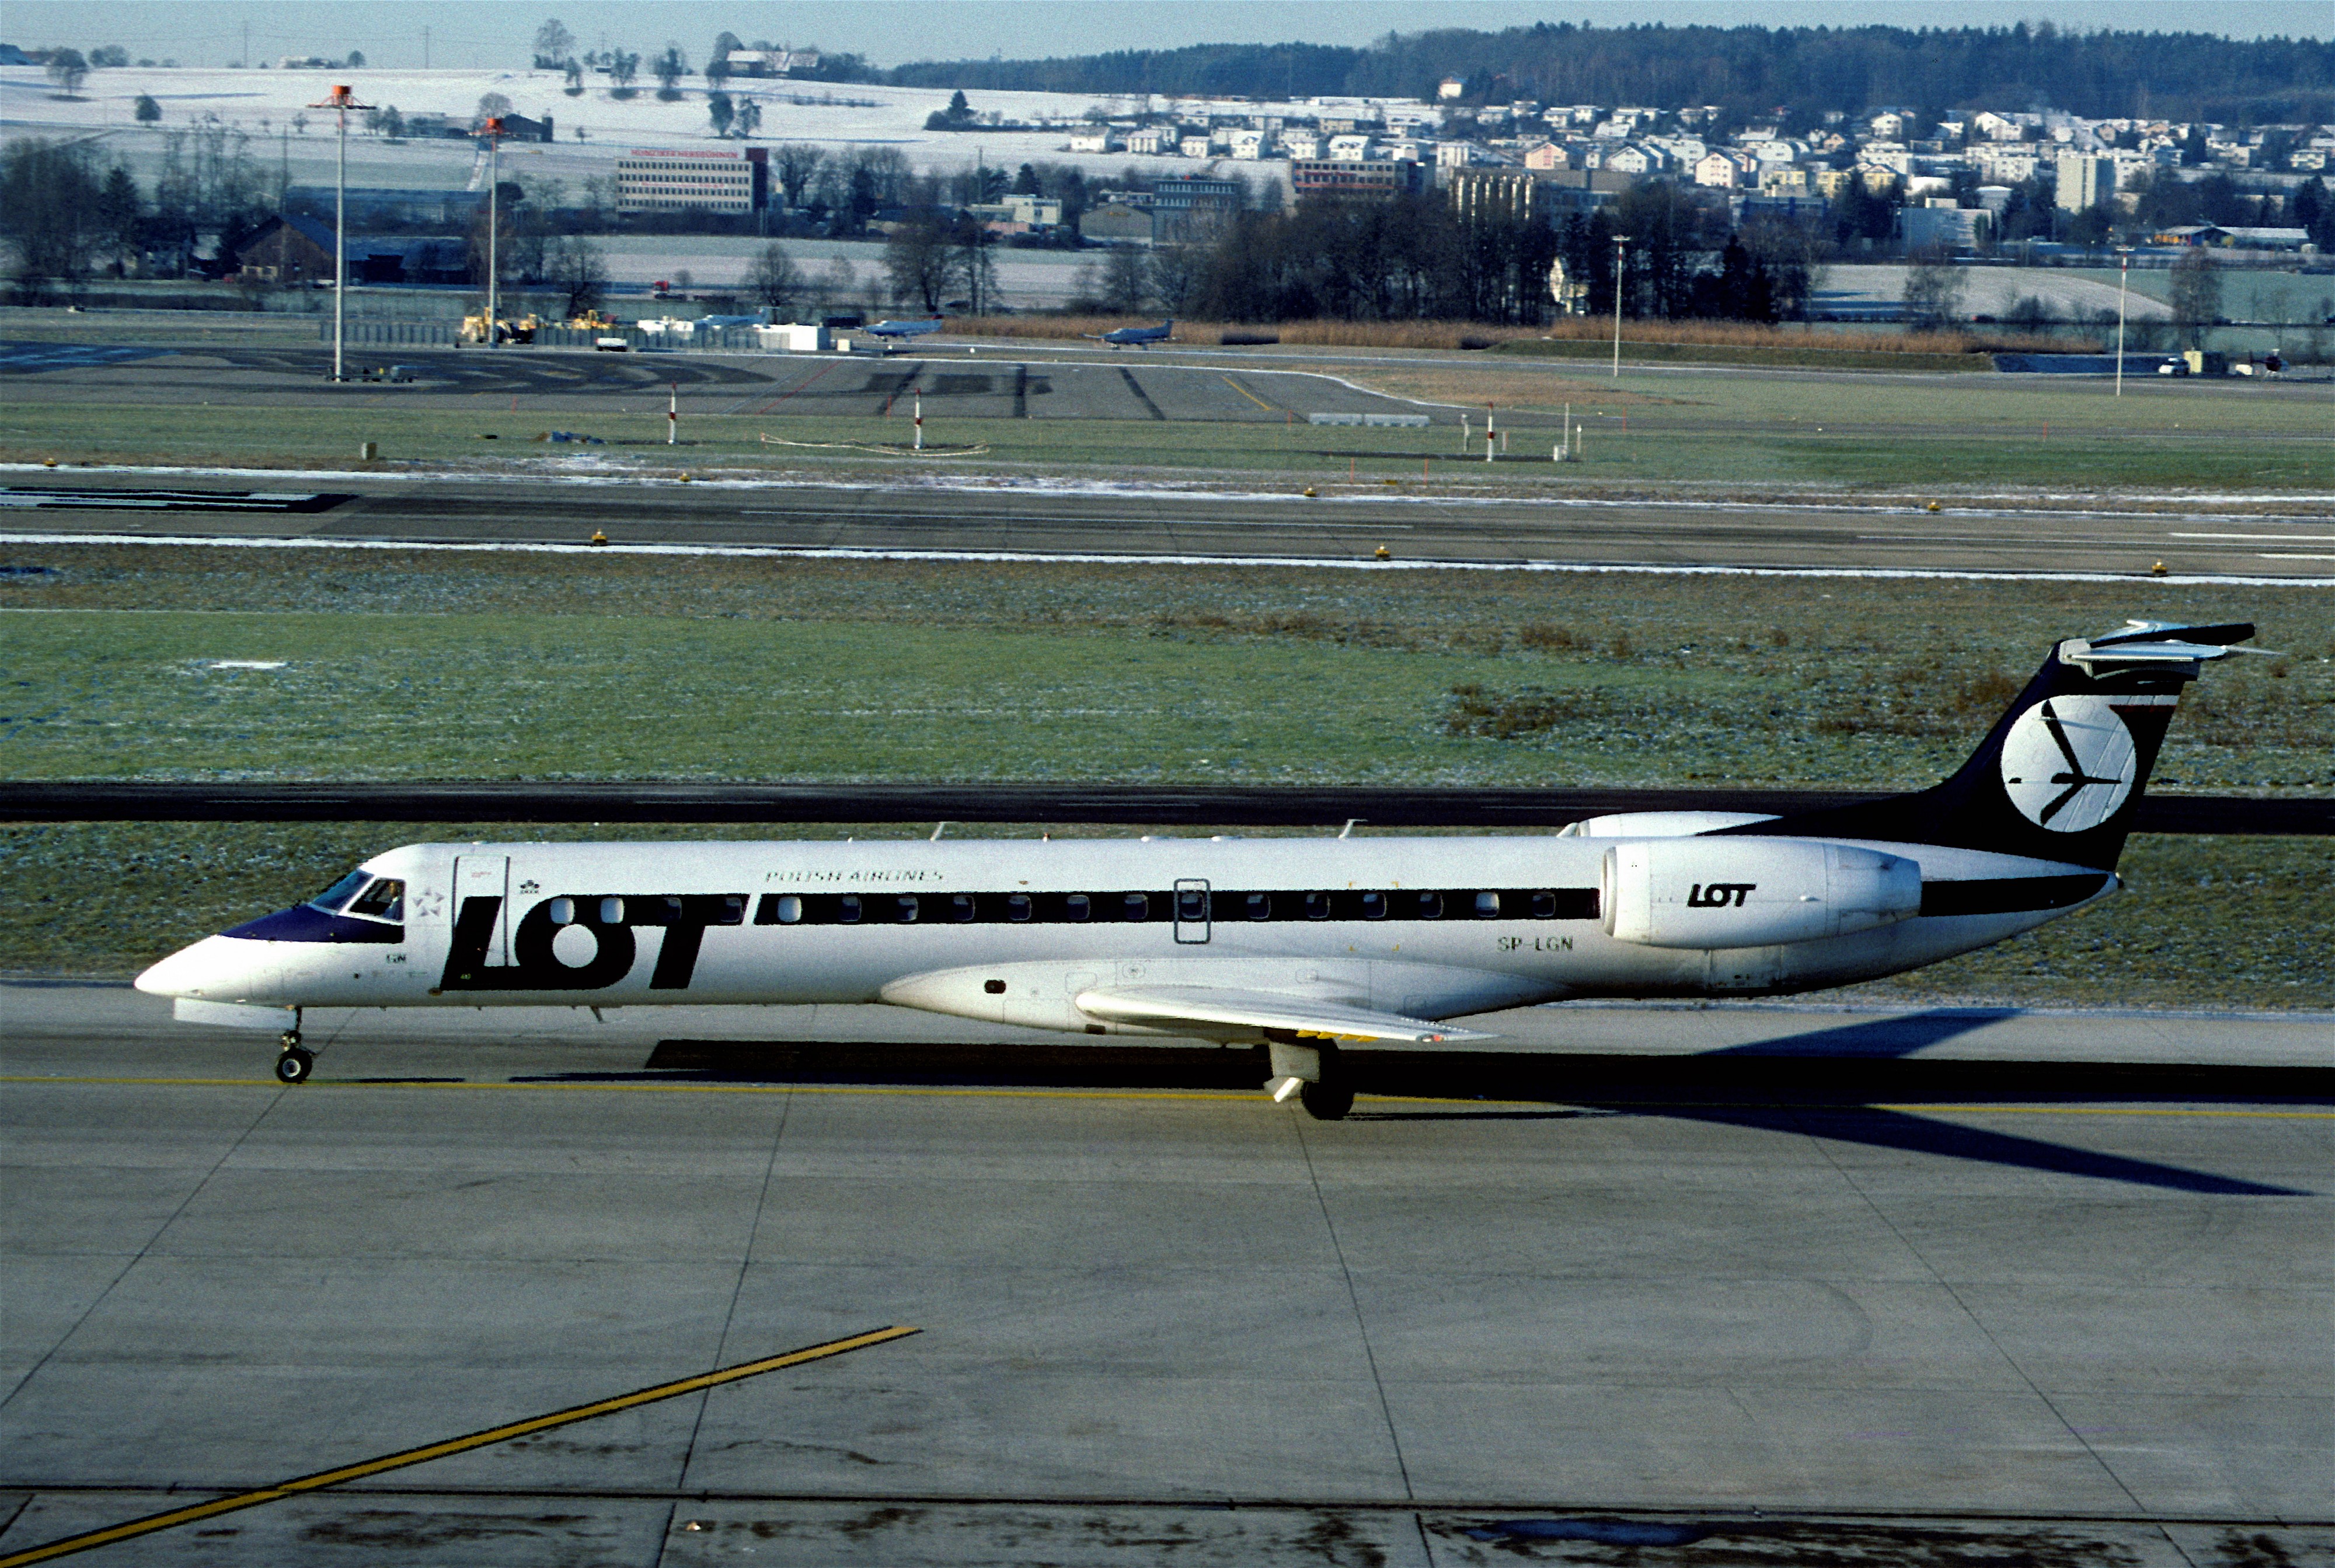 270aa - LOT Polish Airlines Embraer RJ145MP, SP-LGN@ZRH,24.12.2003 - Flickr - Aero Icarus